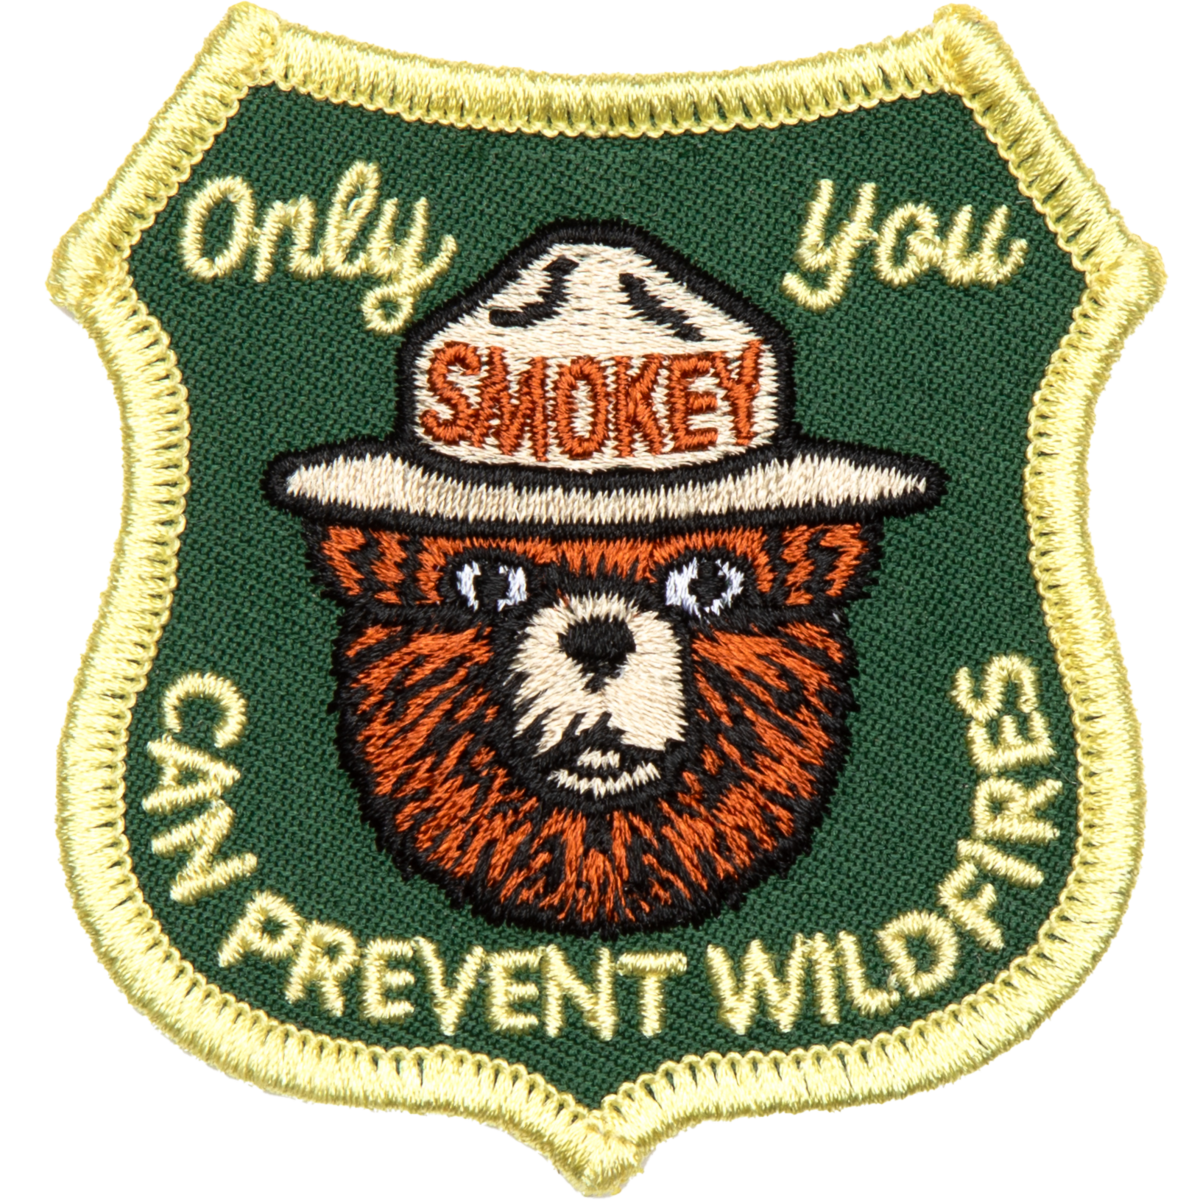 Only You Forestry Embroidered Patch